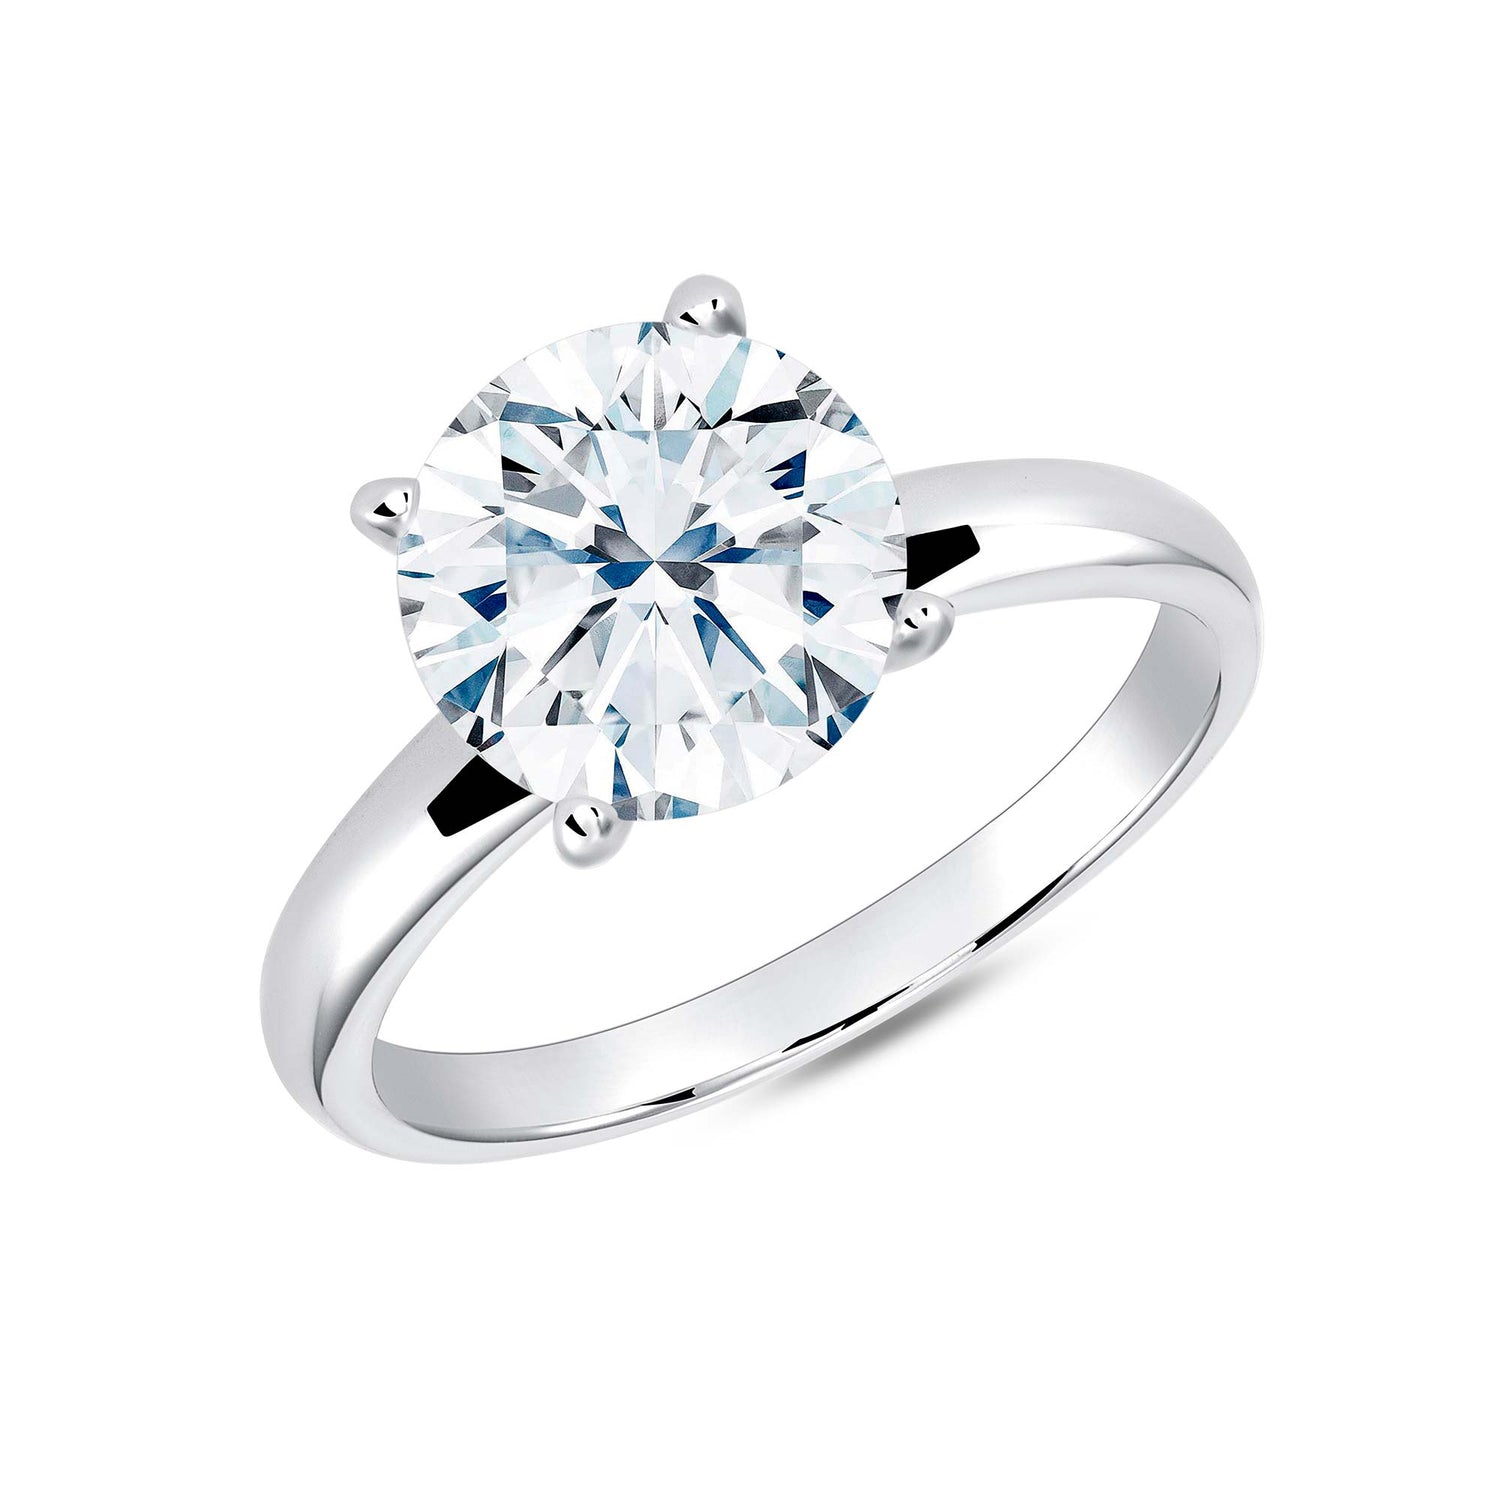 Sterling Silver Solitaire Plain Ring